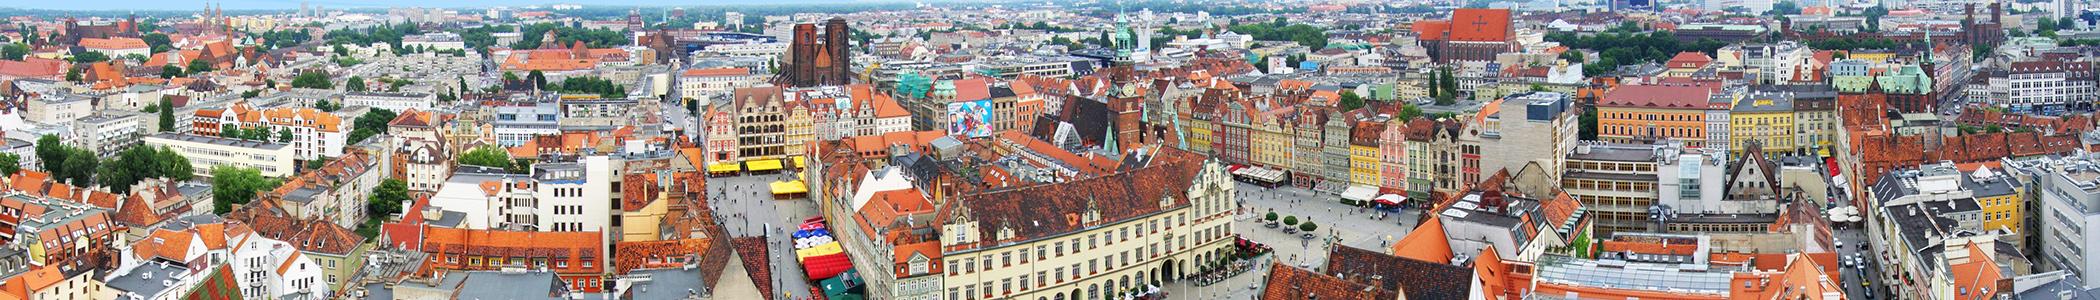 Banner image for Wrocław on GigsGuide